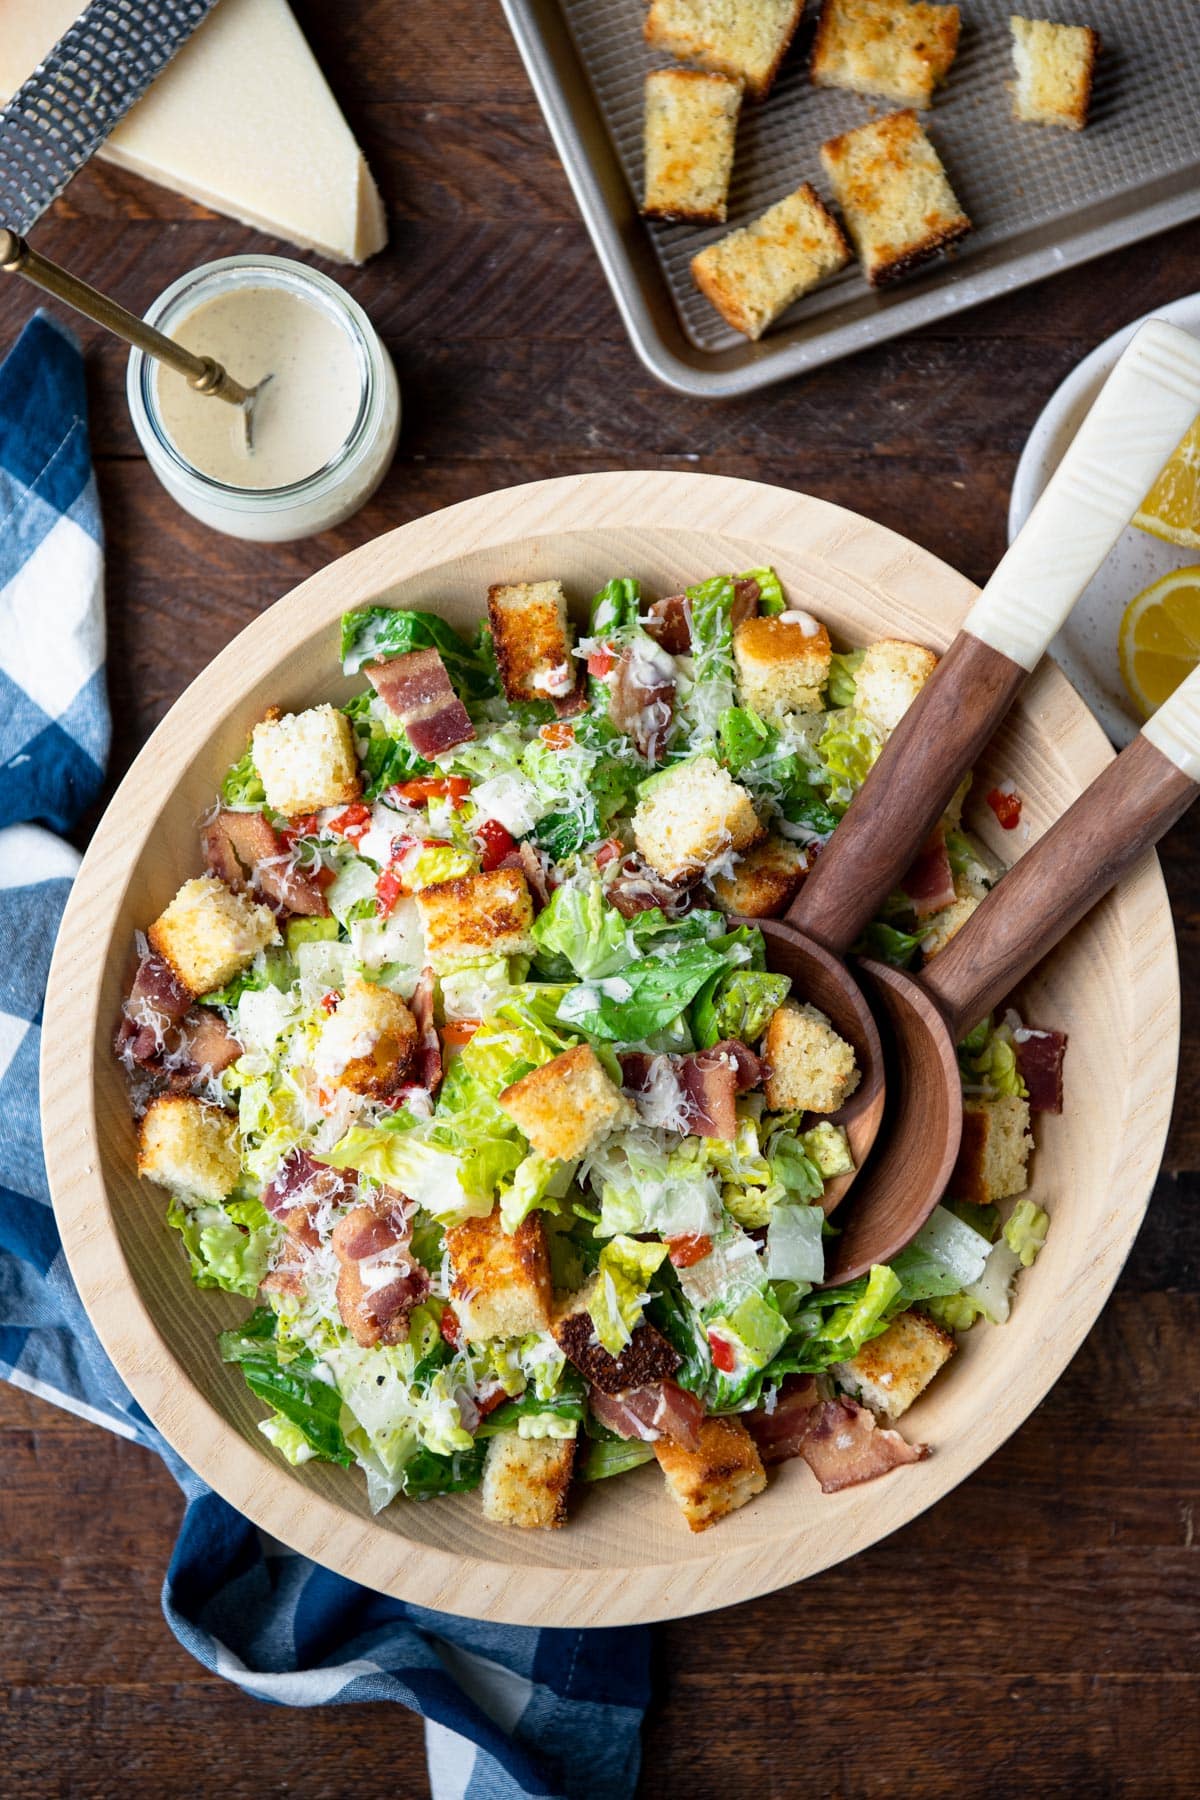 Southern Caesar salad recipe on a wooden table with creamy Caesar dressing, cornbread croutons, and crispy bacon.